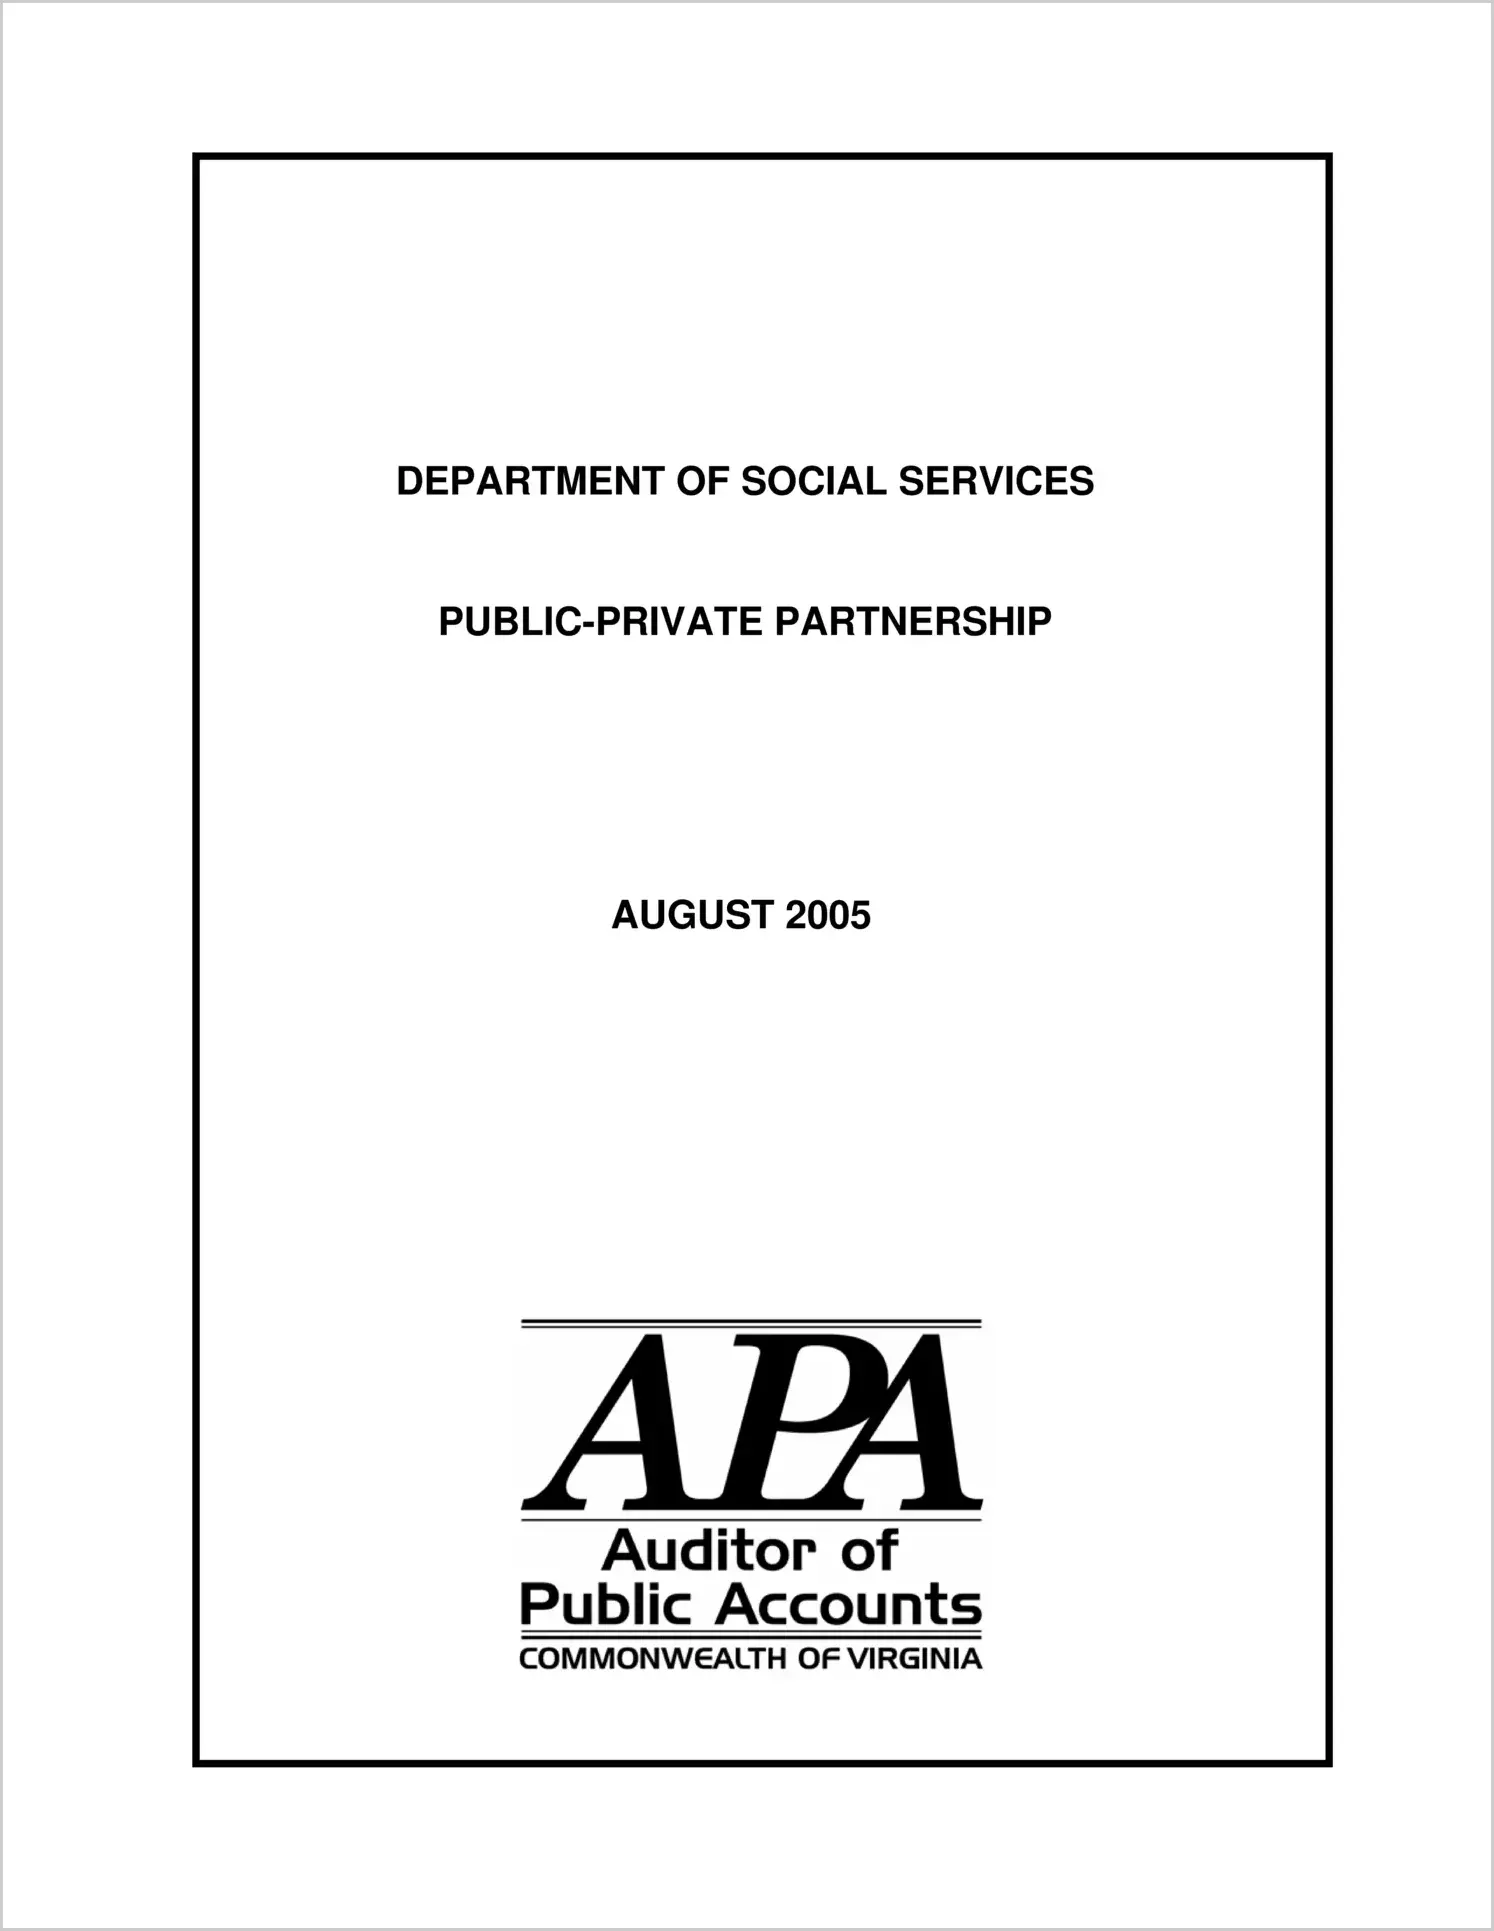 Special ReportDepartment of Social Services Public-Private Partnership(Report Date: 8/05)